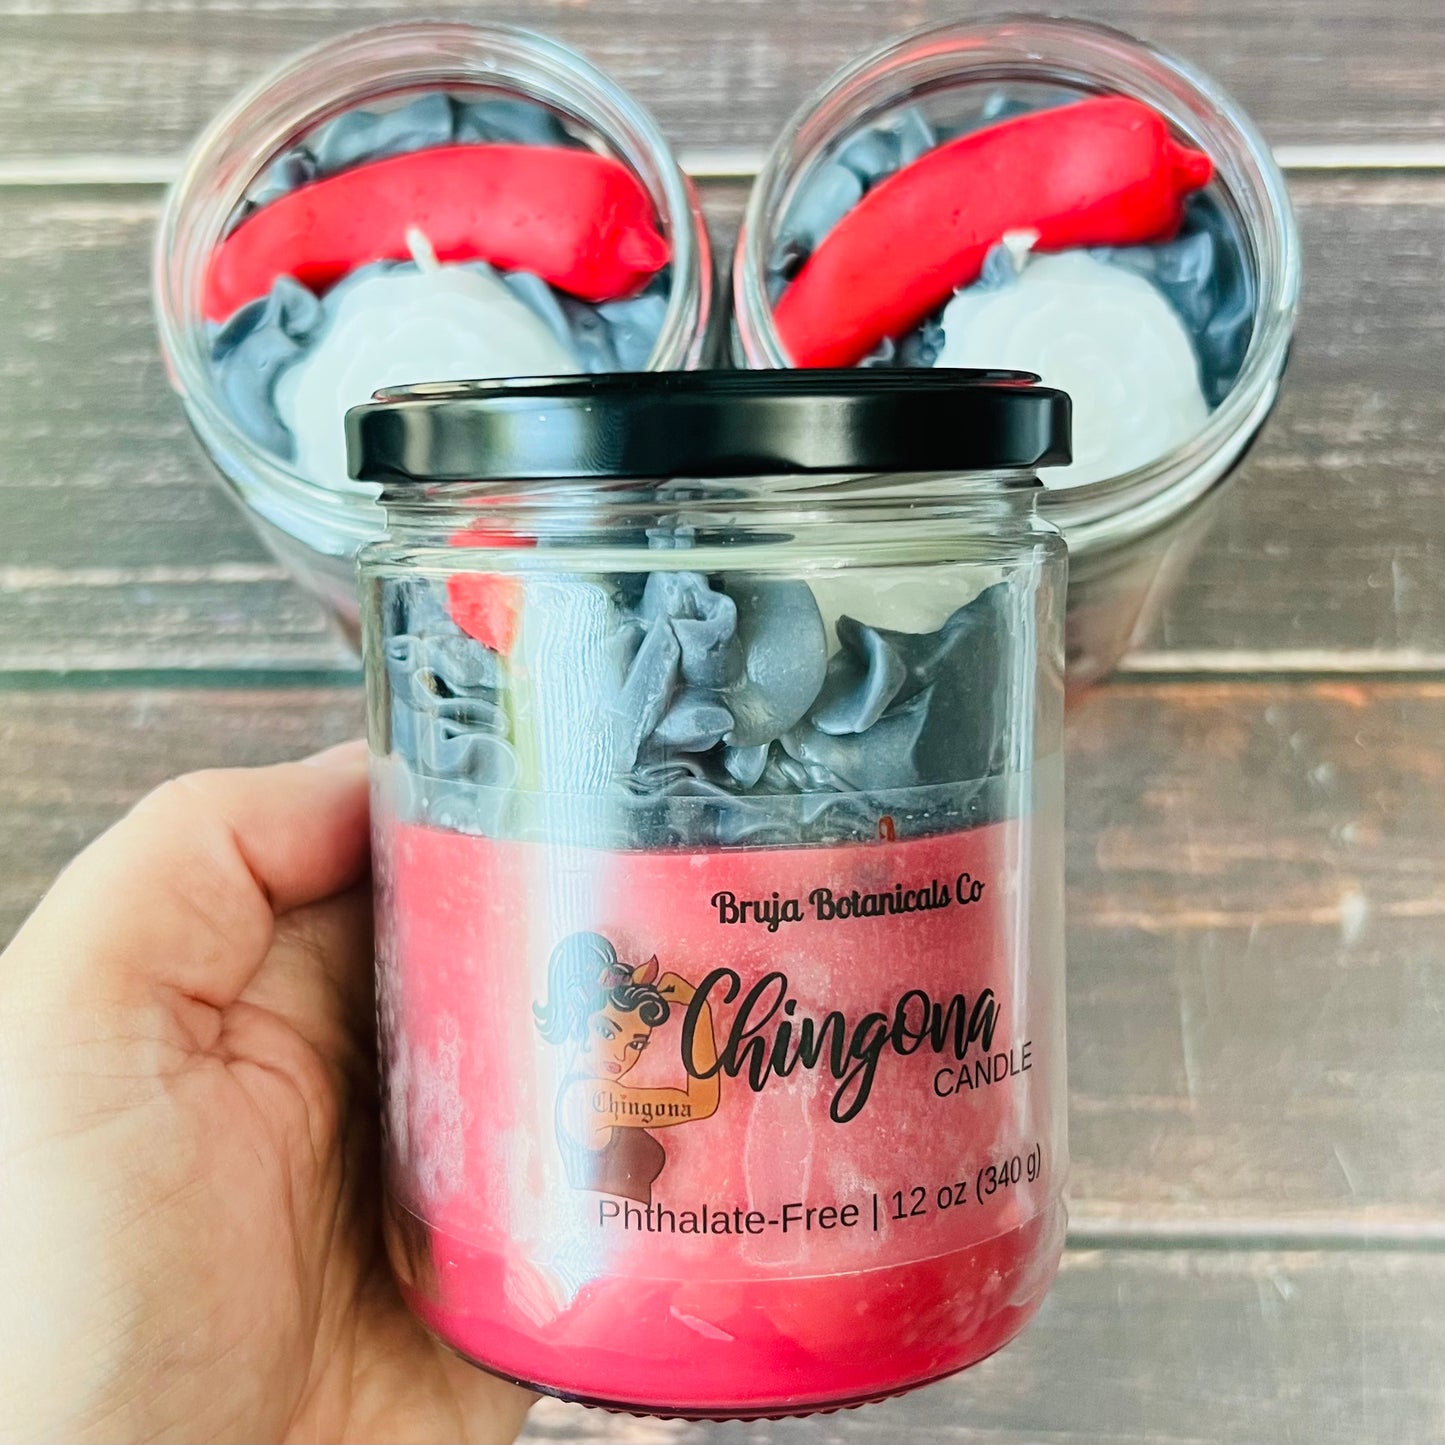 Chingona Whipped Candle